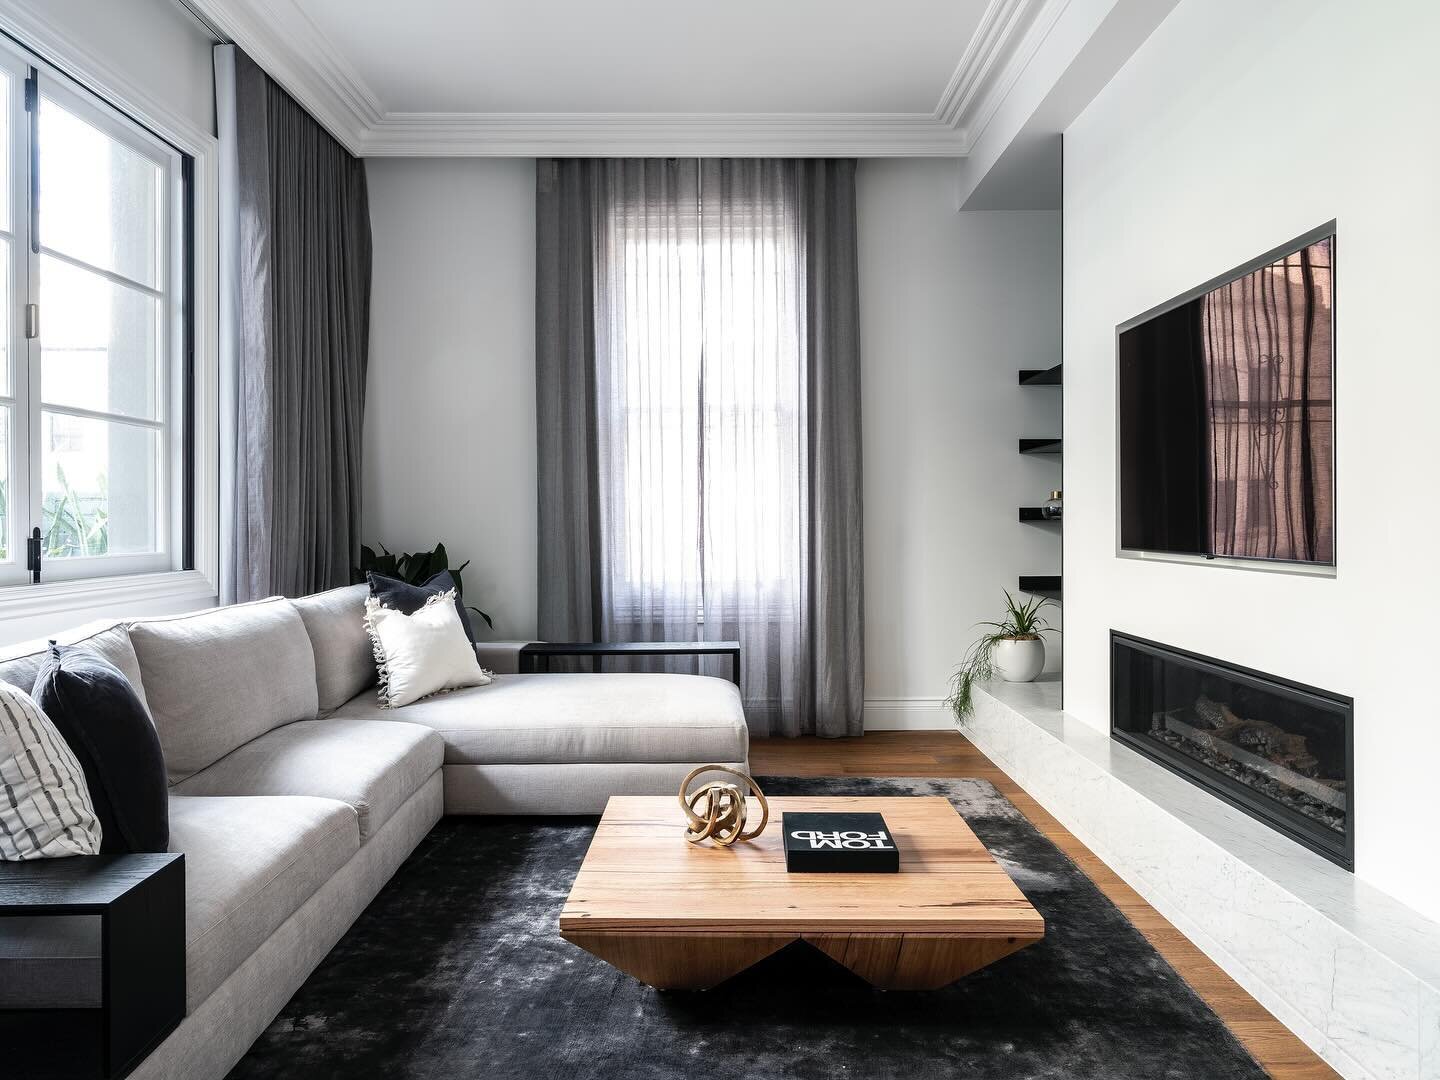 RILEY &bull; This modern living space pays homage to the properties heritage through the use of traditional cornices and soft grey window furnishings #InnovateInteriors